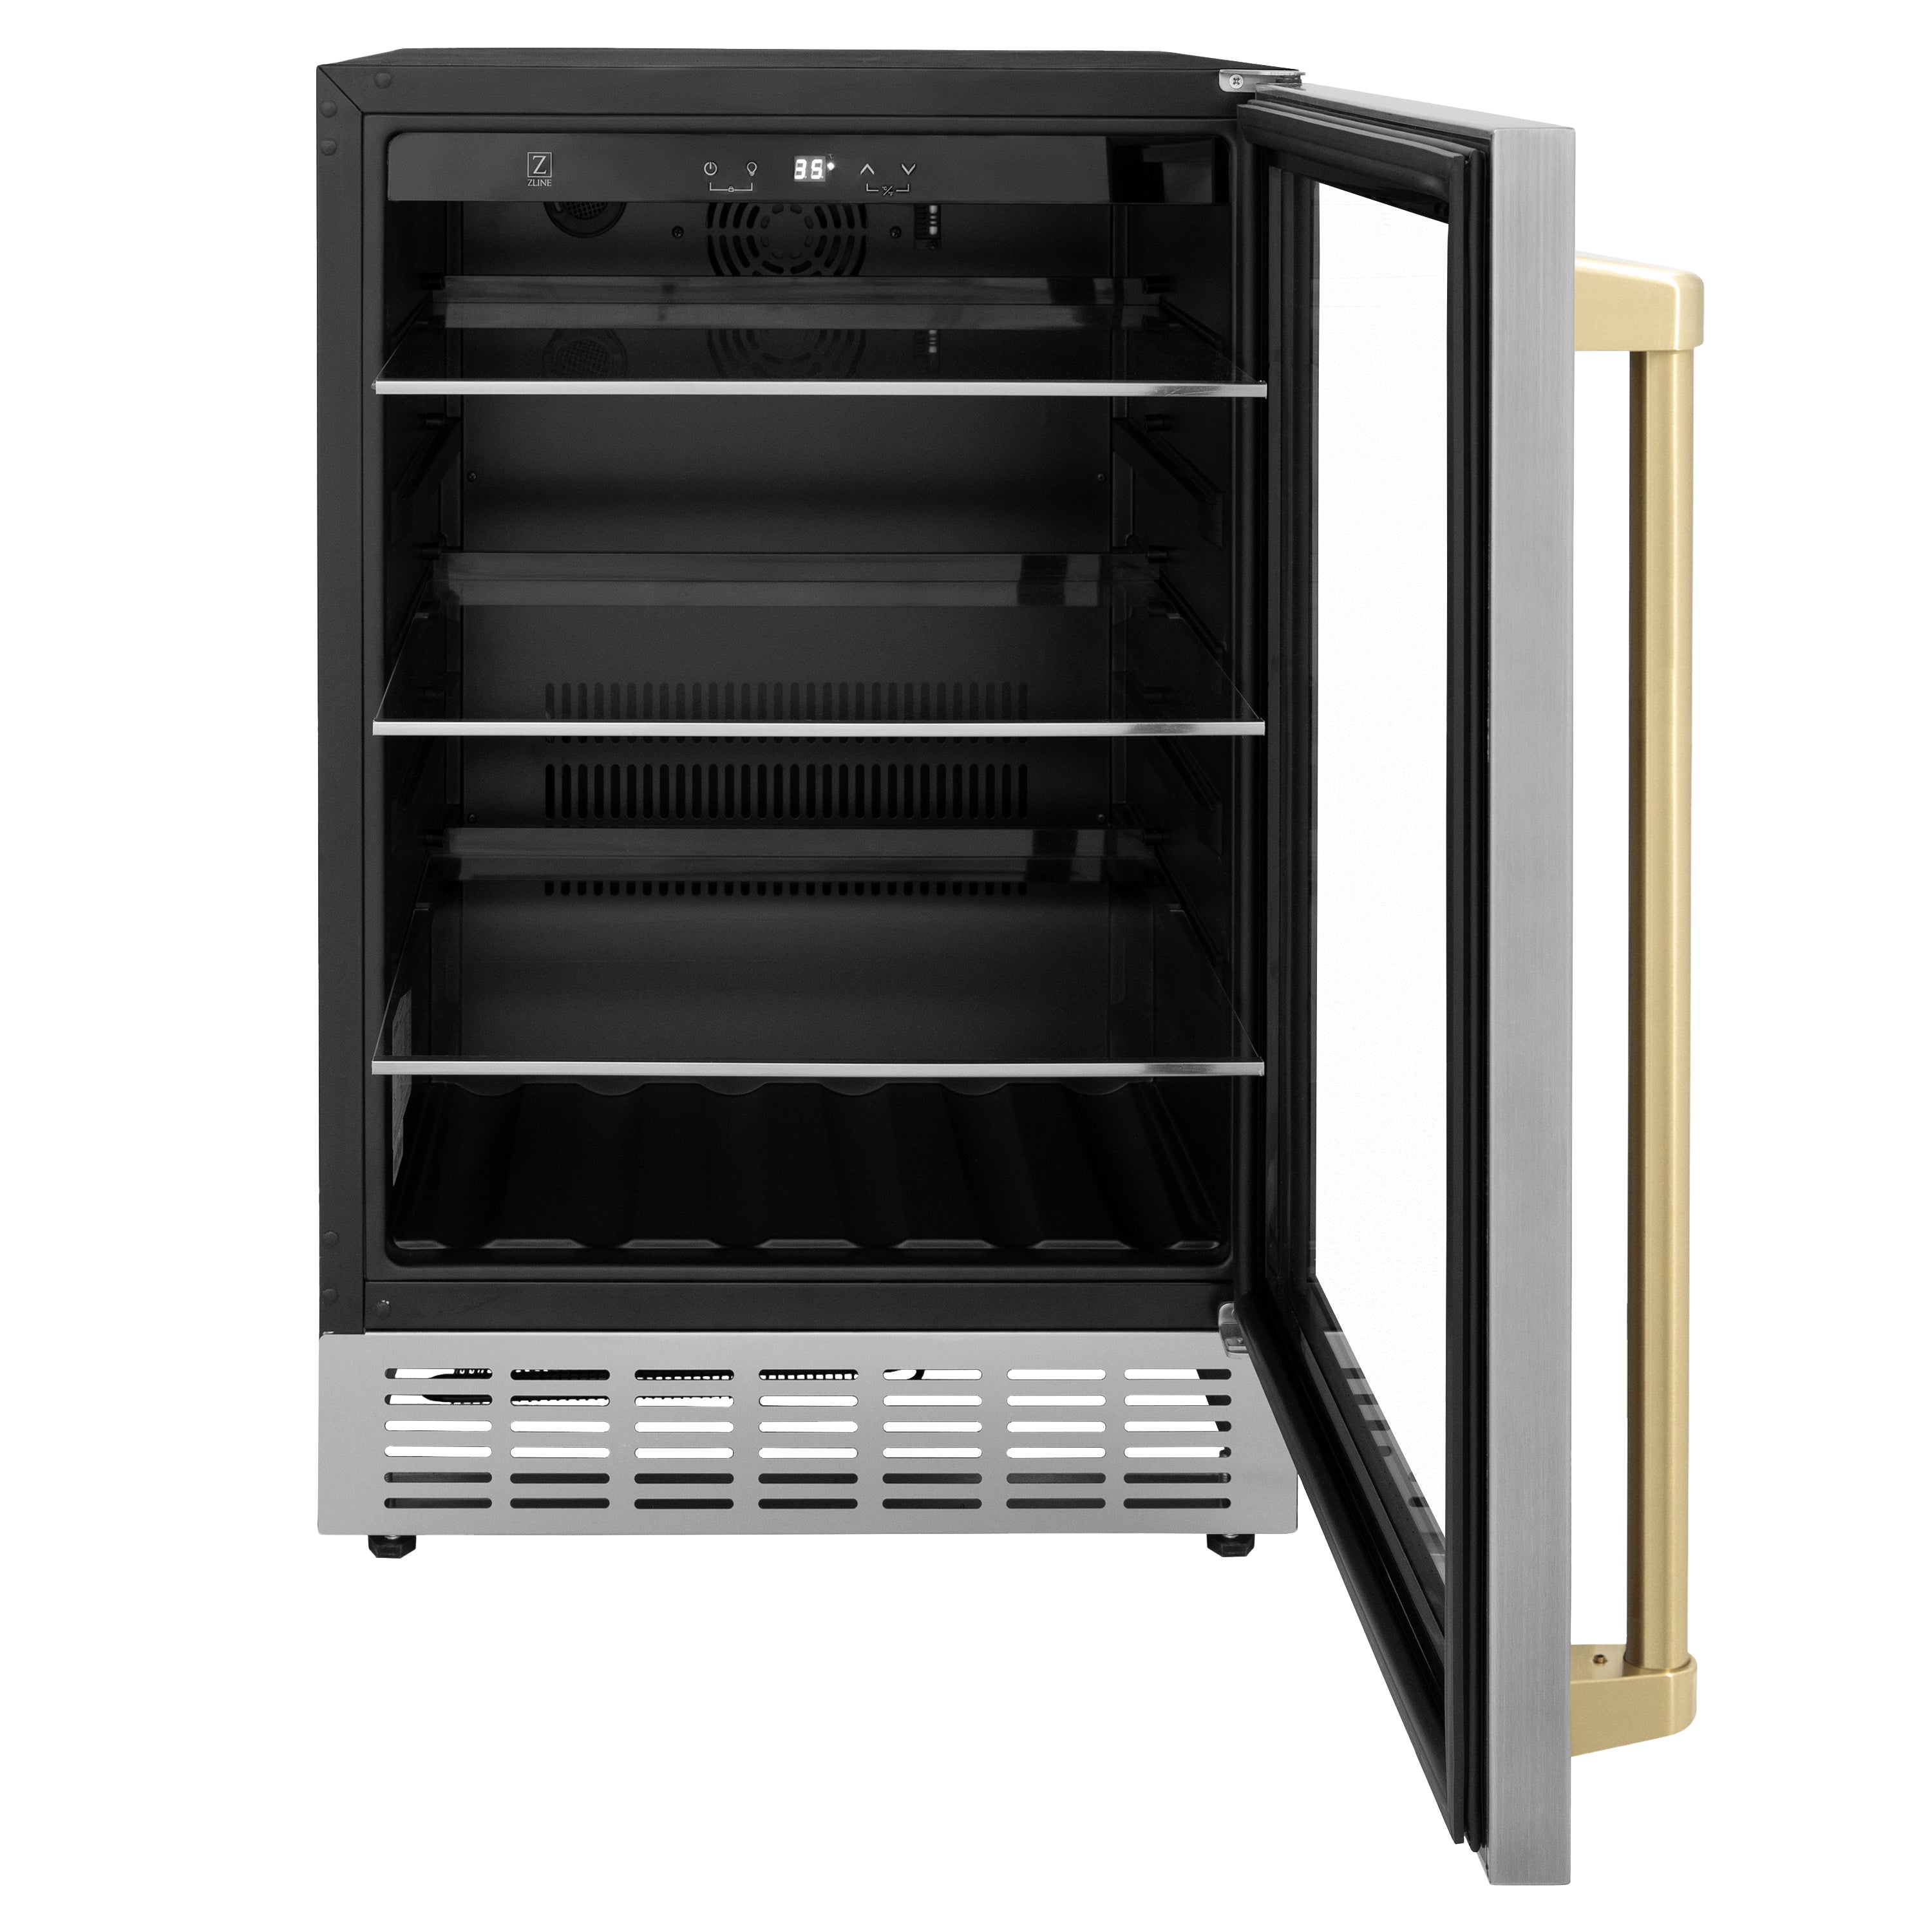 ZLINE 24" Autograph Edition 154 Can Beverage Cooler Fridge with Adjustable Shelves in Stainless Steel with Champagne Bronze Accents (RBVZ-US-24-CB) - New Star Living